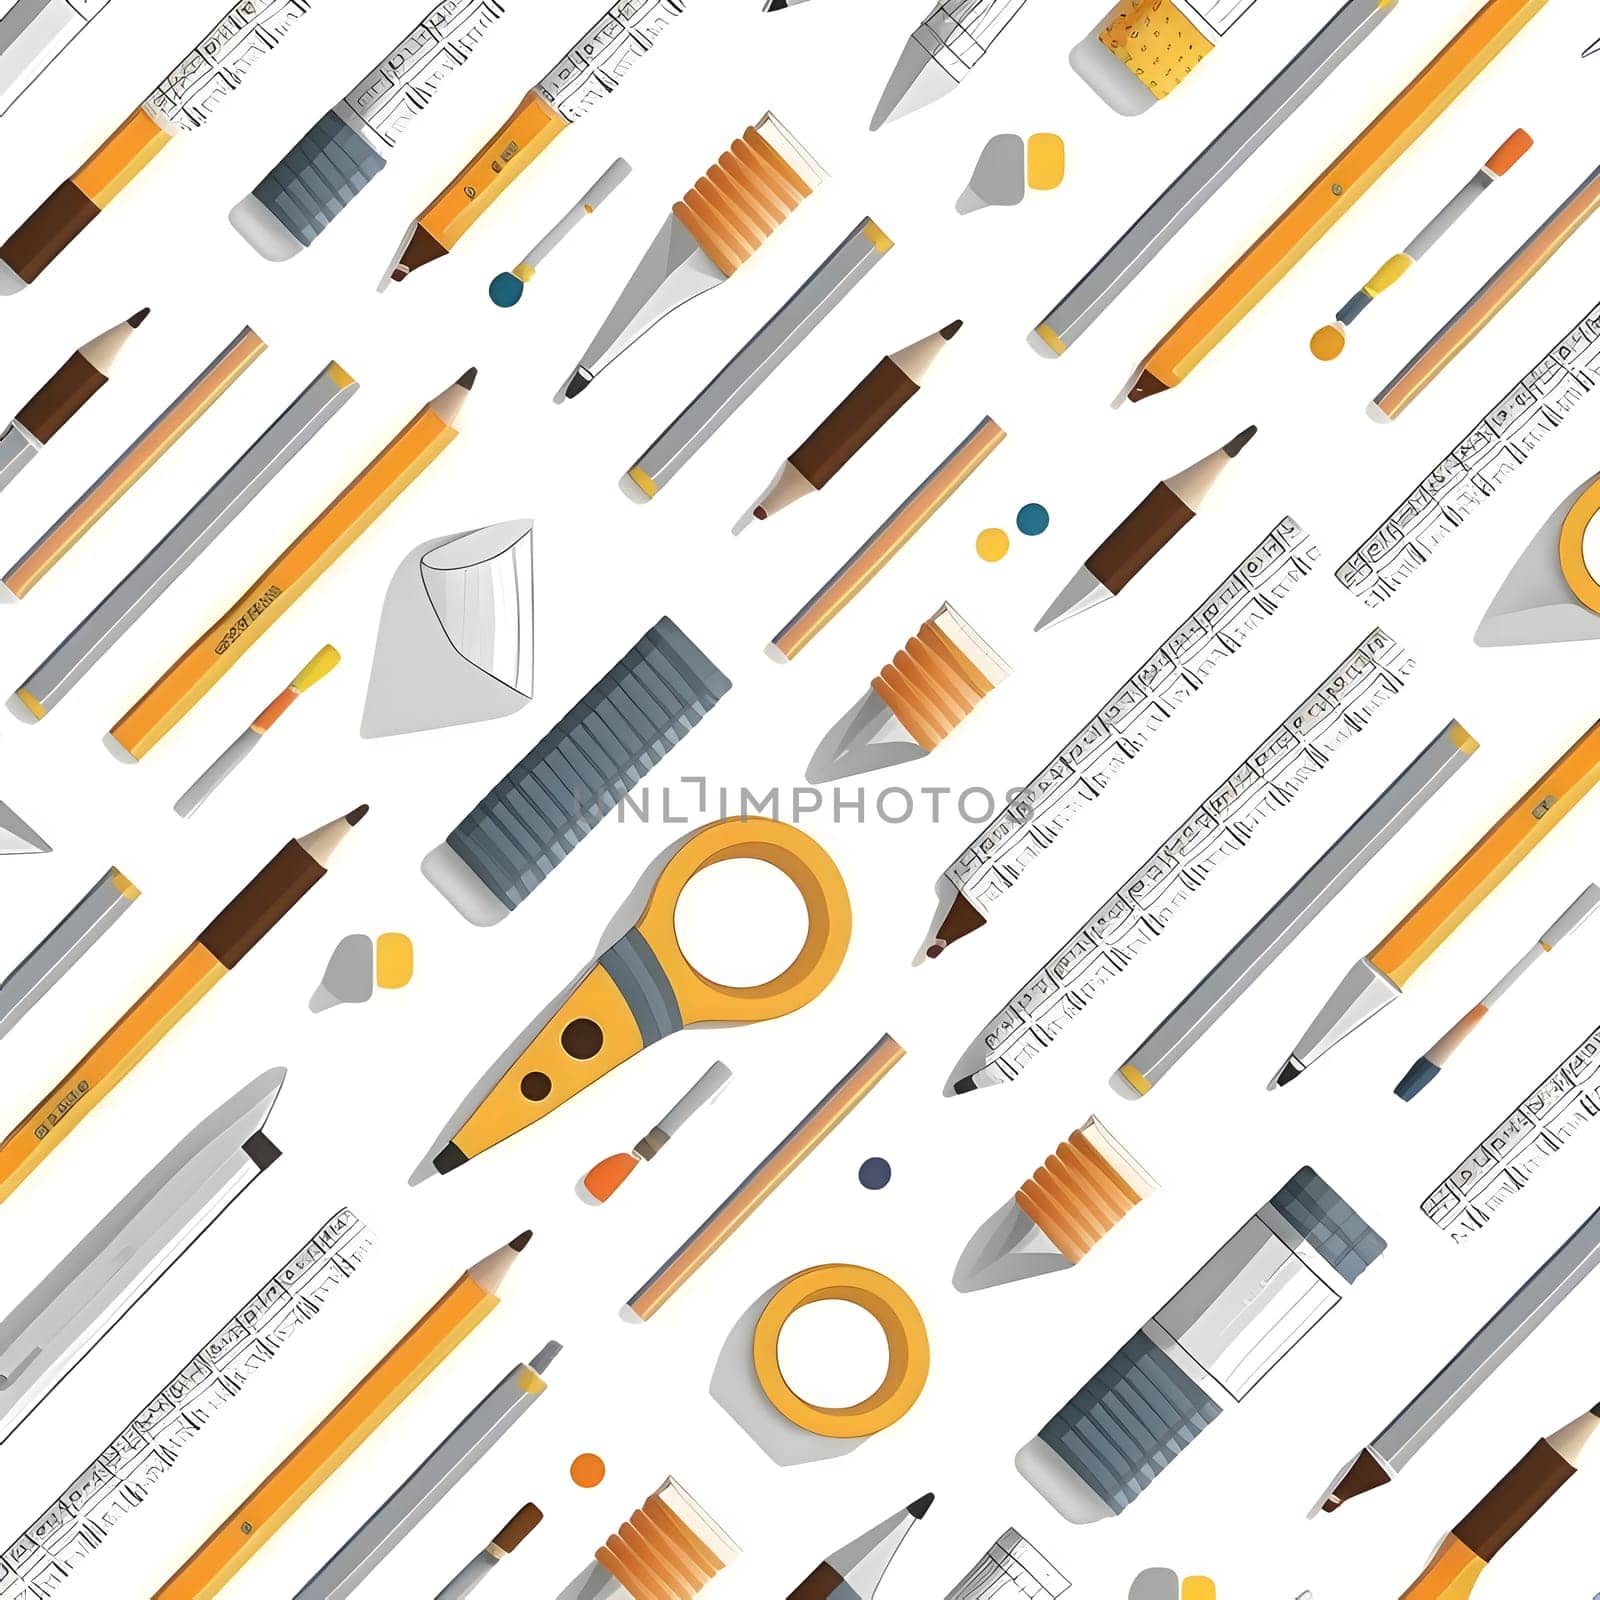 Patterns and banners backgrounds: Seamless pattern with pencils, ruler, eraser, pencil sharpener and eraser. Vector illustration